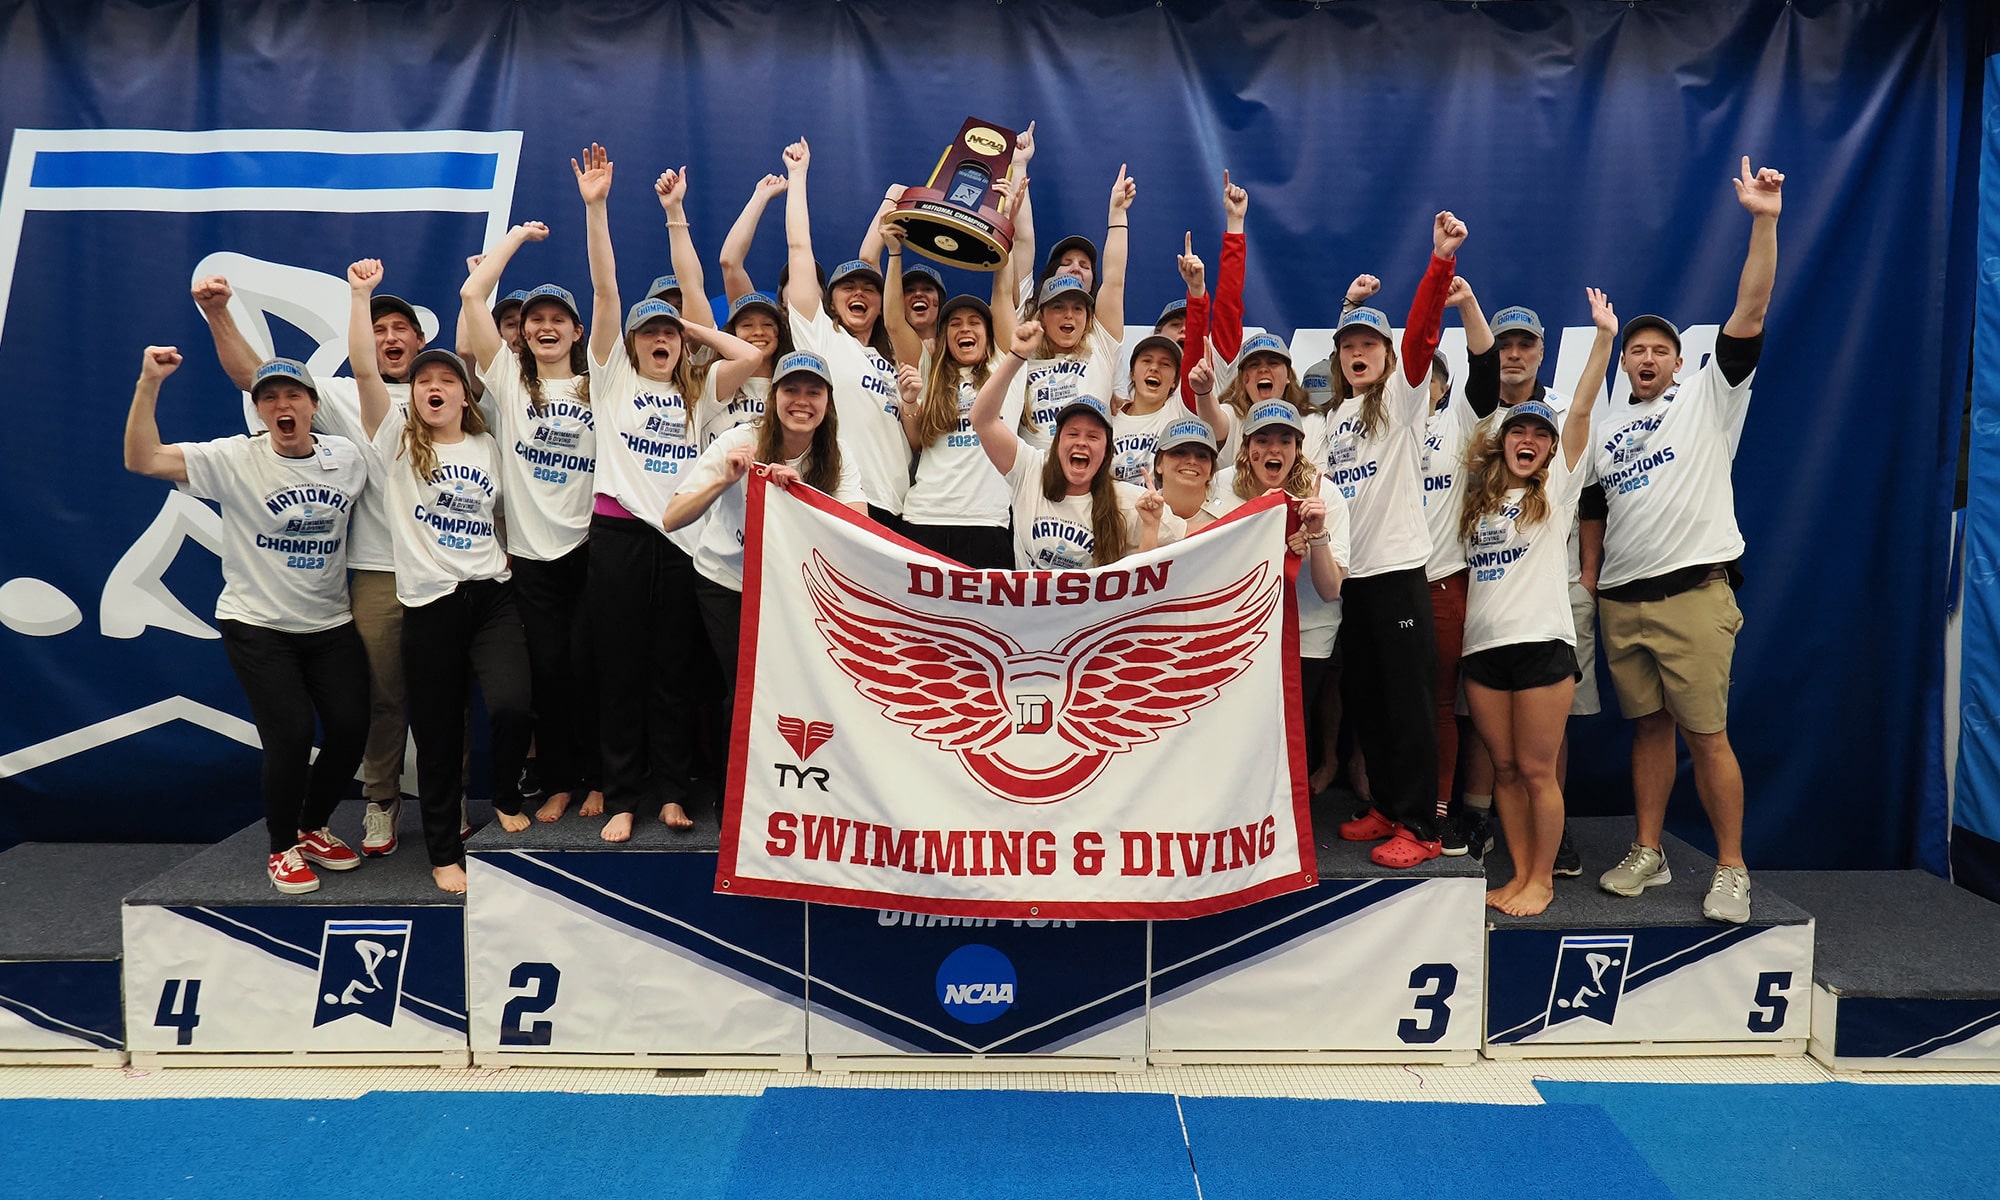 2023 Denison swim & dive team standing on the podium holding a trophy and a flag